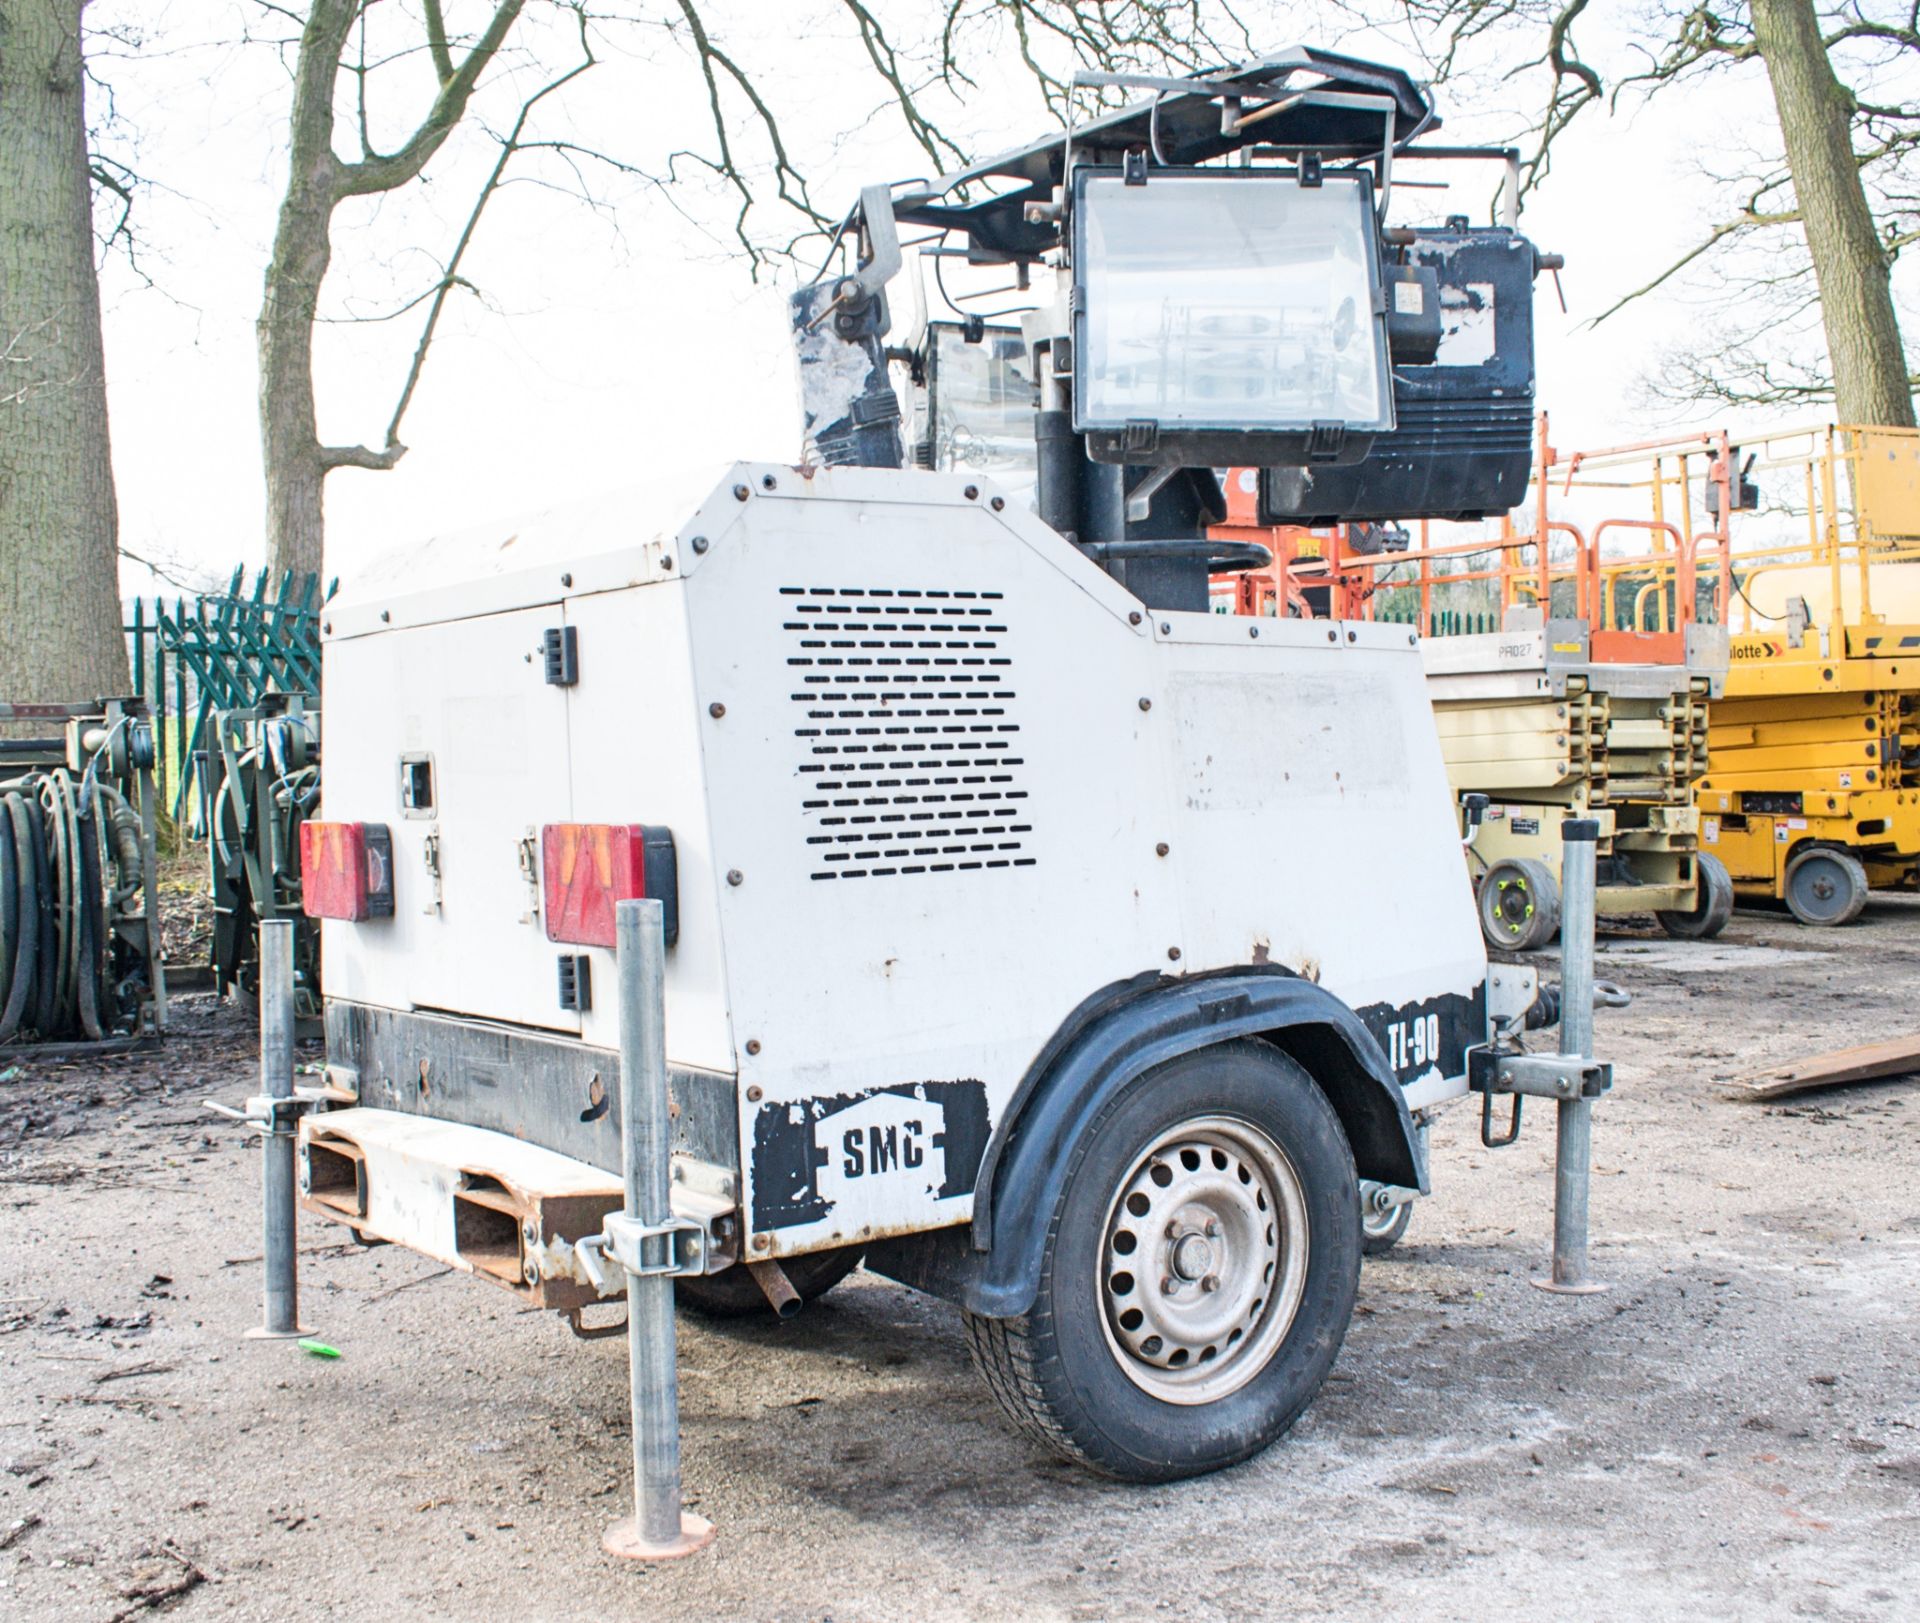 SMC TL-90 diesel driven mobile lighting tower Year: 2008 S/N: 87891 Recorded Hours: H82806 - Image 4 of 9